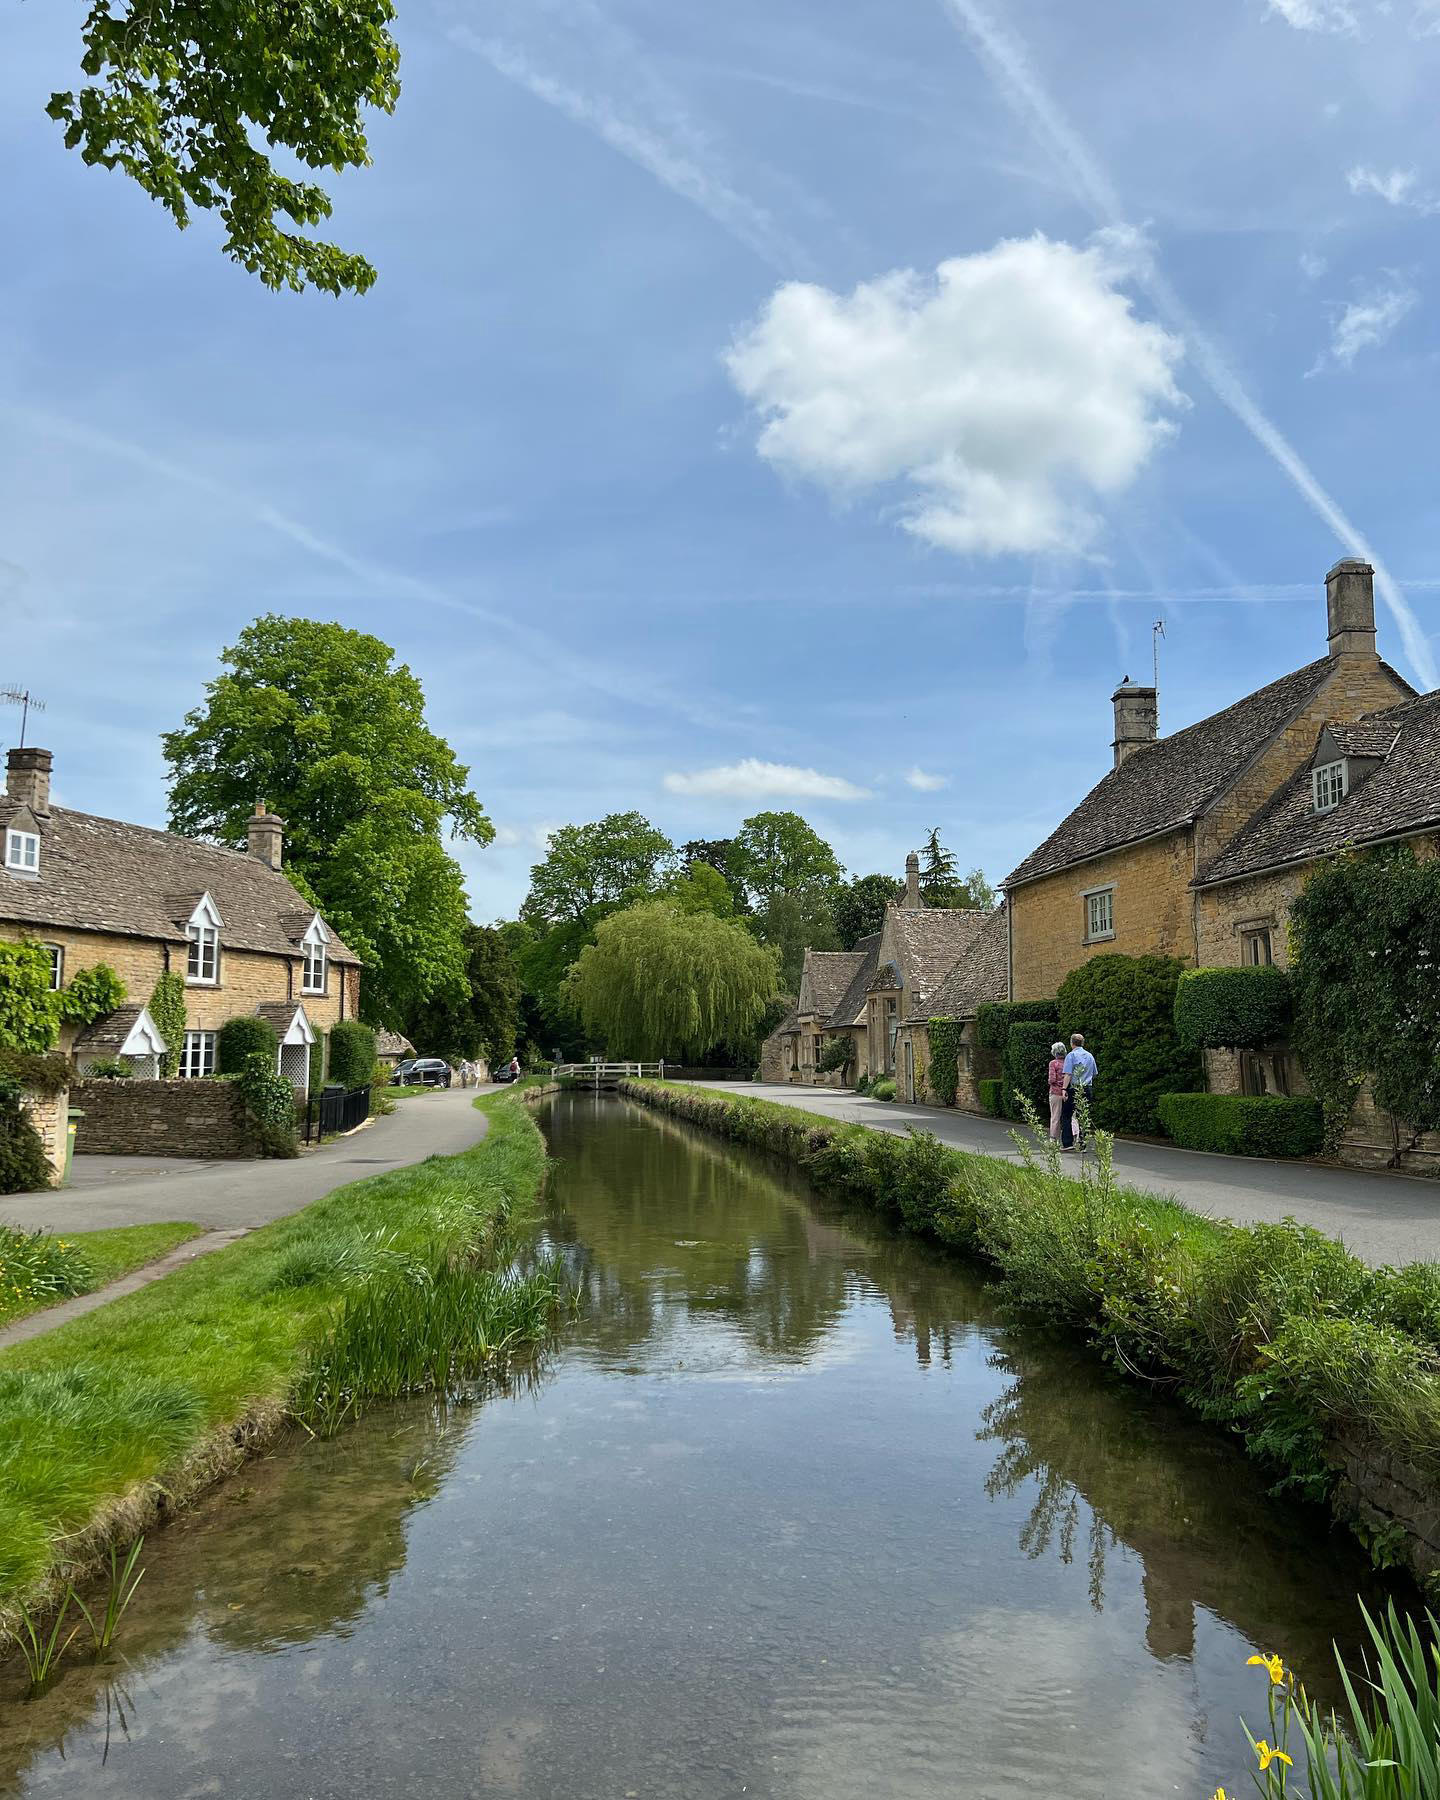 All Things England - Lower Slaughter - it feels like time has stopped in this beautiful #Cotswolds